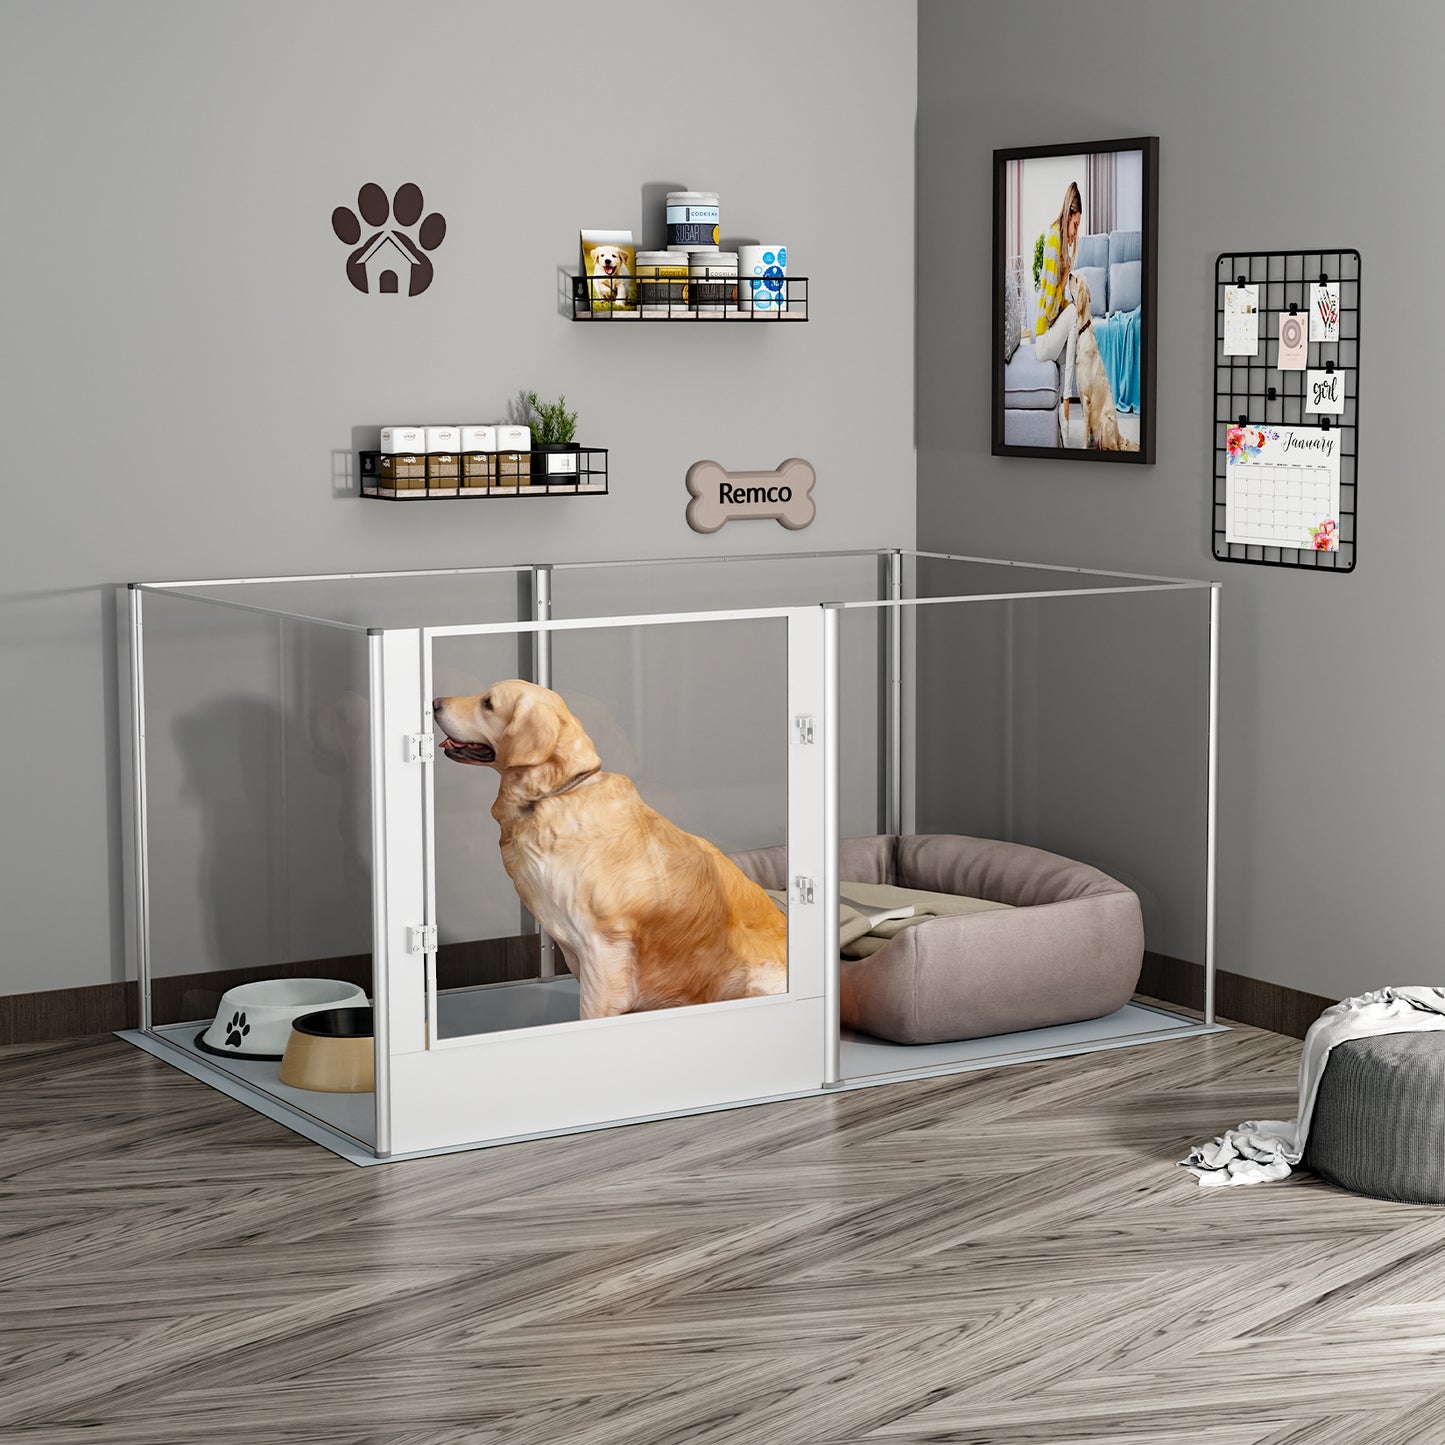 Acrylic Dog Playpen Fence: Indoor Clear Acrylic Pet Whelping Pen Box Dog Playpen Kennel Crate 80cm Taller with Waterproof Pad for Dogs, Rabbits, Guinea Pig